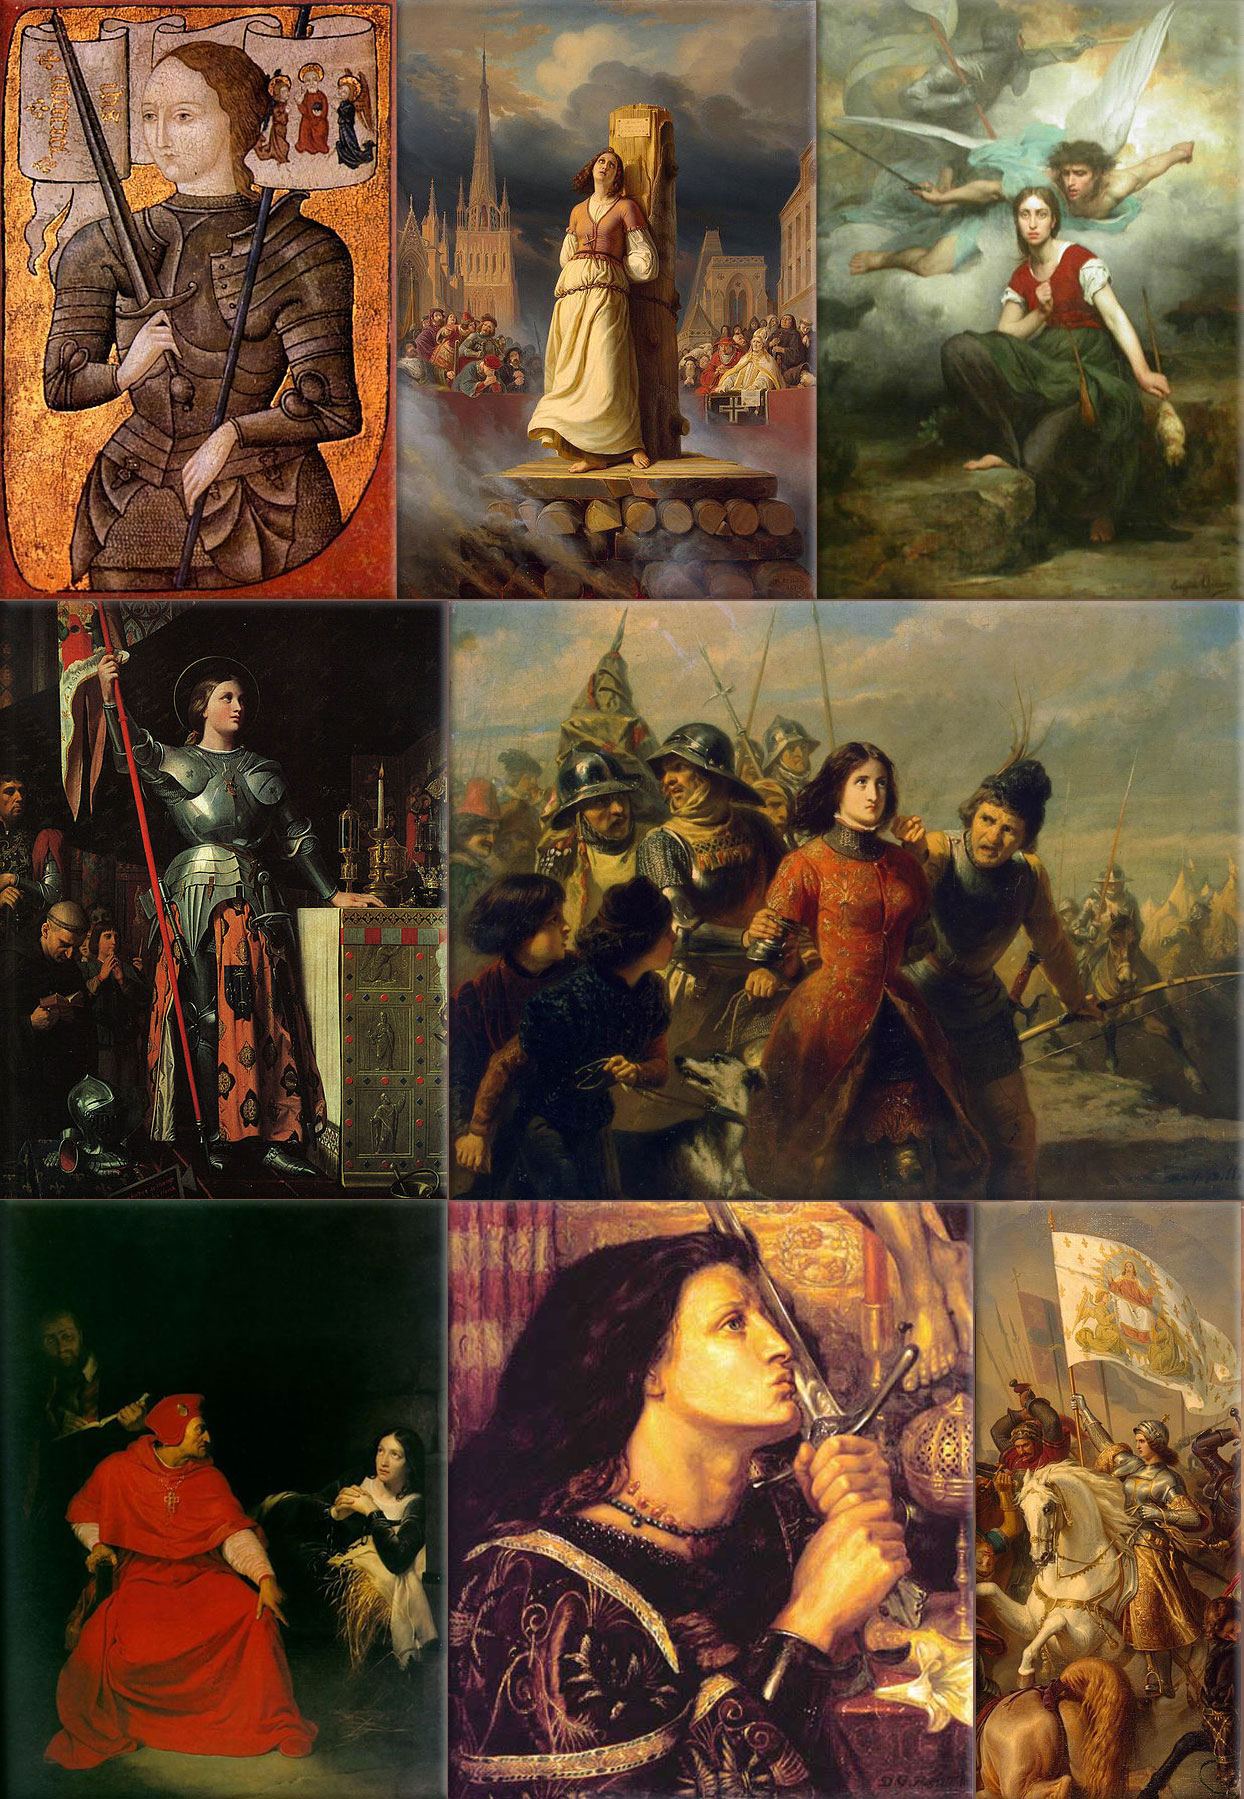 Joan of Arc Collage: An artist's interpretation, since the only known direct portrait has not survived. (Centre Historique des Archives Nationales, Paris, AE II 2490) (1485); Joan of Arc's Death at the Stake, by Hermann Stilke (1843); Jeanne d' Arc, by Eugene Thirion (1876); Joan at the coronation of Charles VII, by Jean Auguste Dominique Ingres in (1854); Joan of Arc and Prophet-French Pilgrimage; Joan interrogated in her prison cell by Cardinal Winchester, by Hippolyte Delaroche, (1824); Saint Joan of Arc, Vatican City; Joan of Arc in Battle, by Hermann Anton Stilke